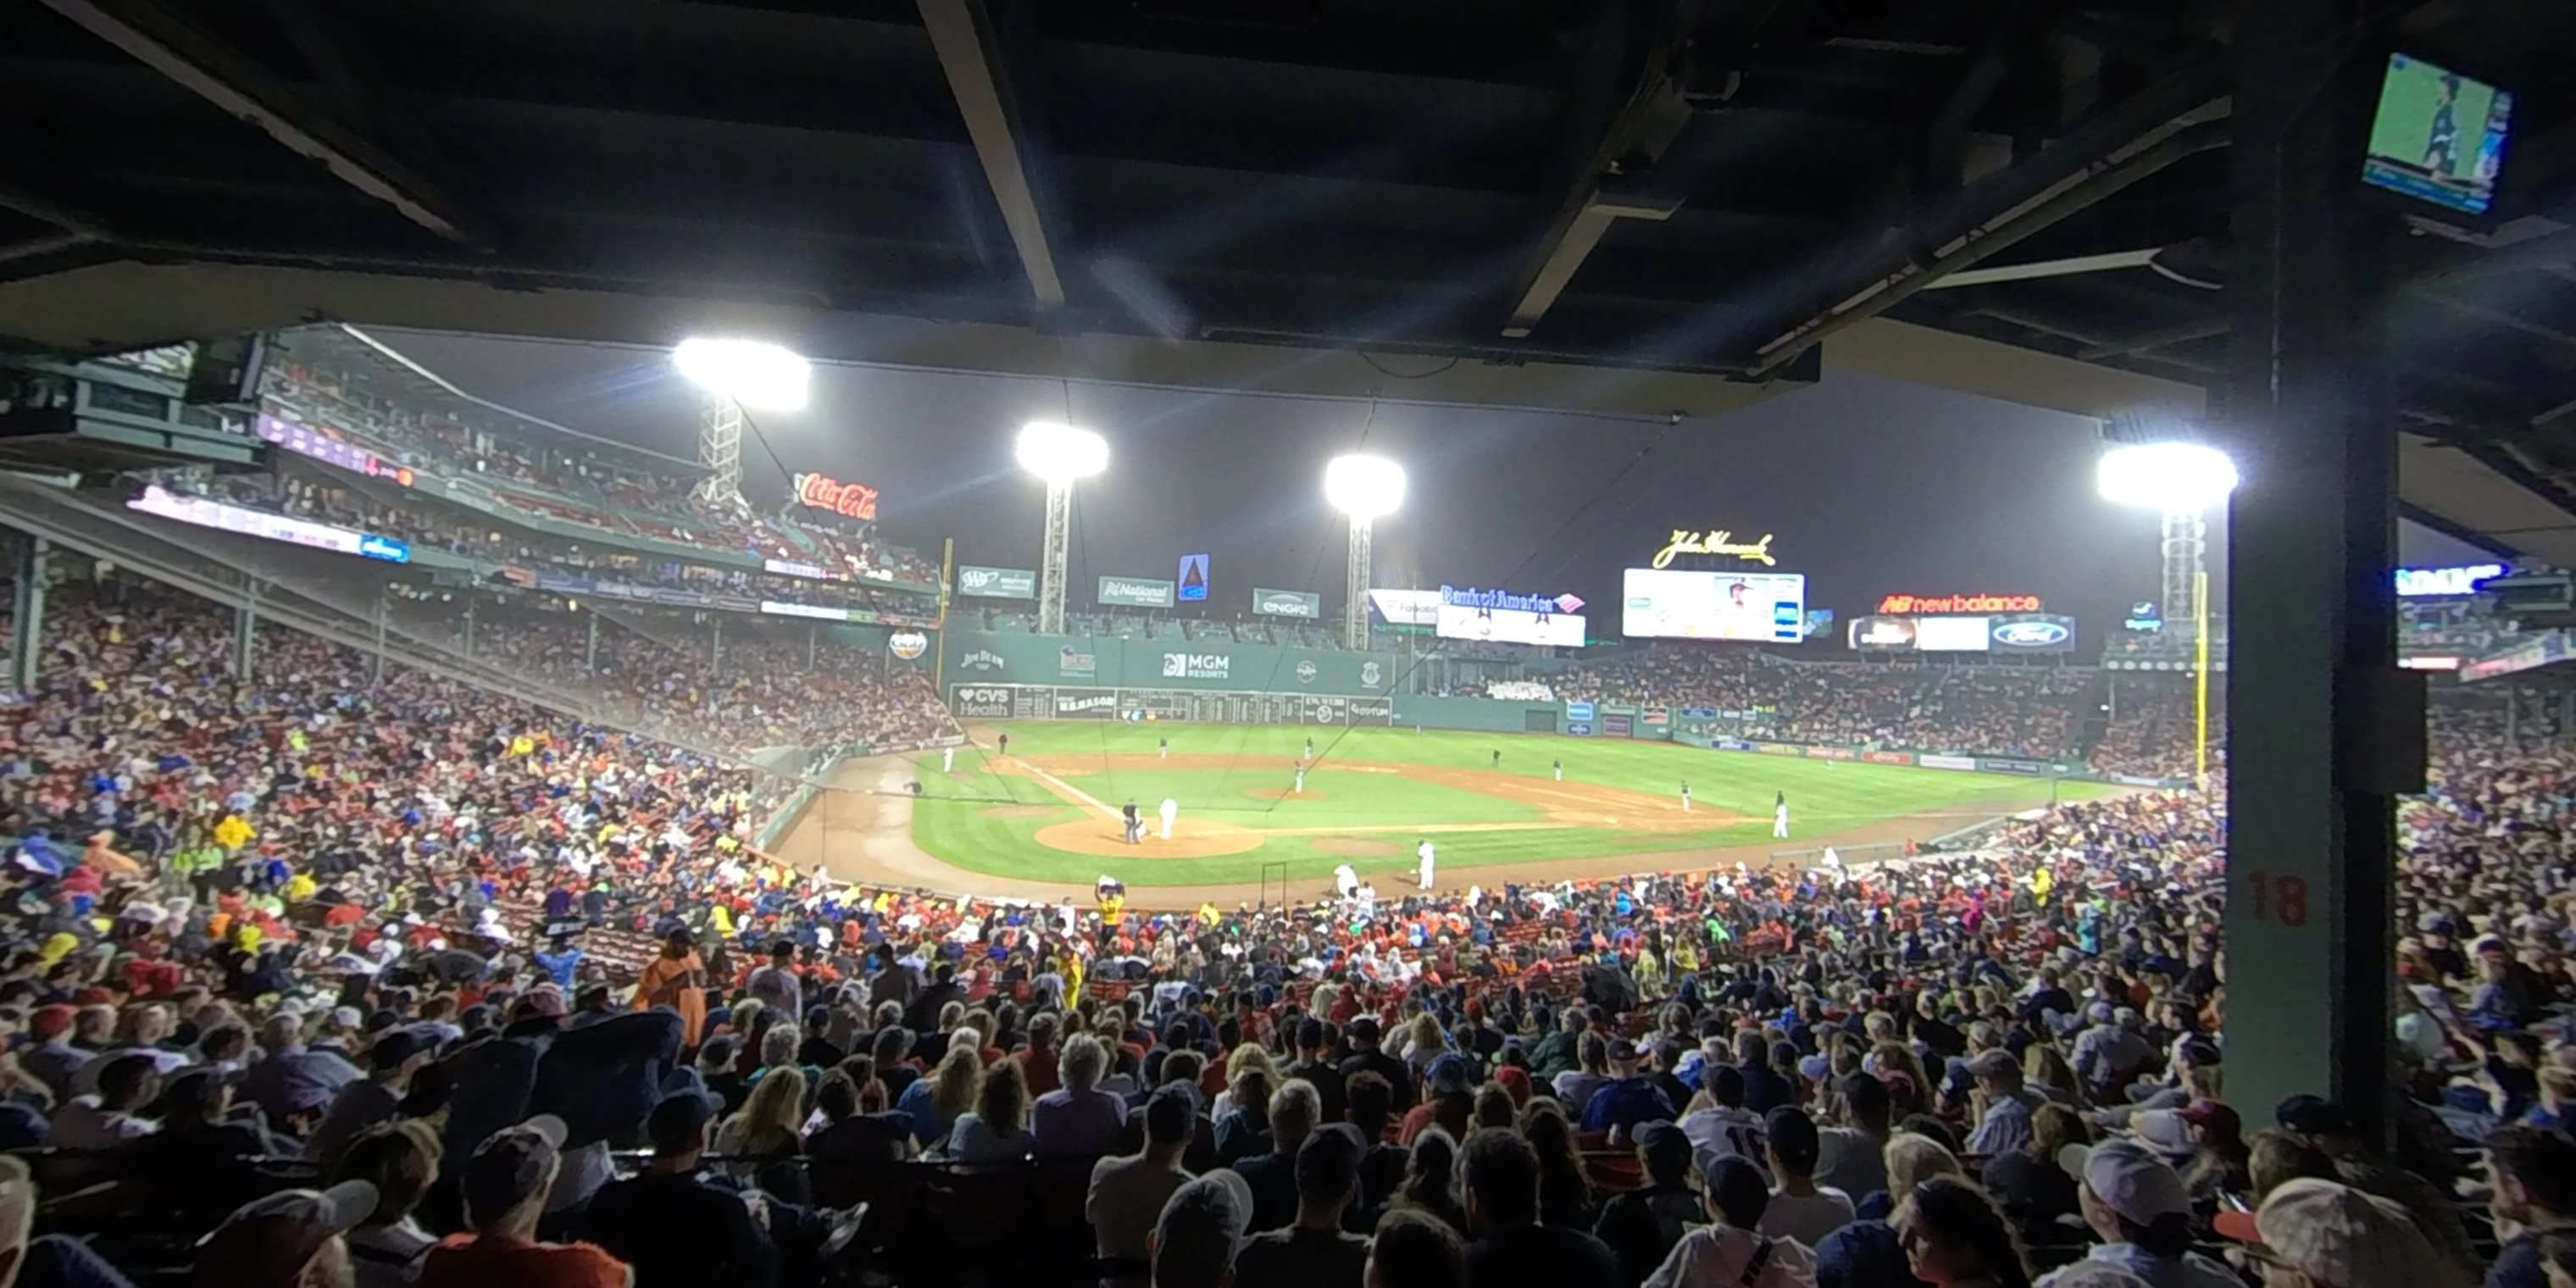 grandstand 18 panoramic seat view  for baseball - fenway park